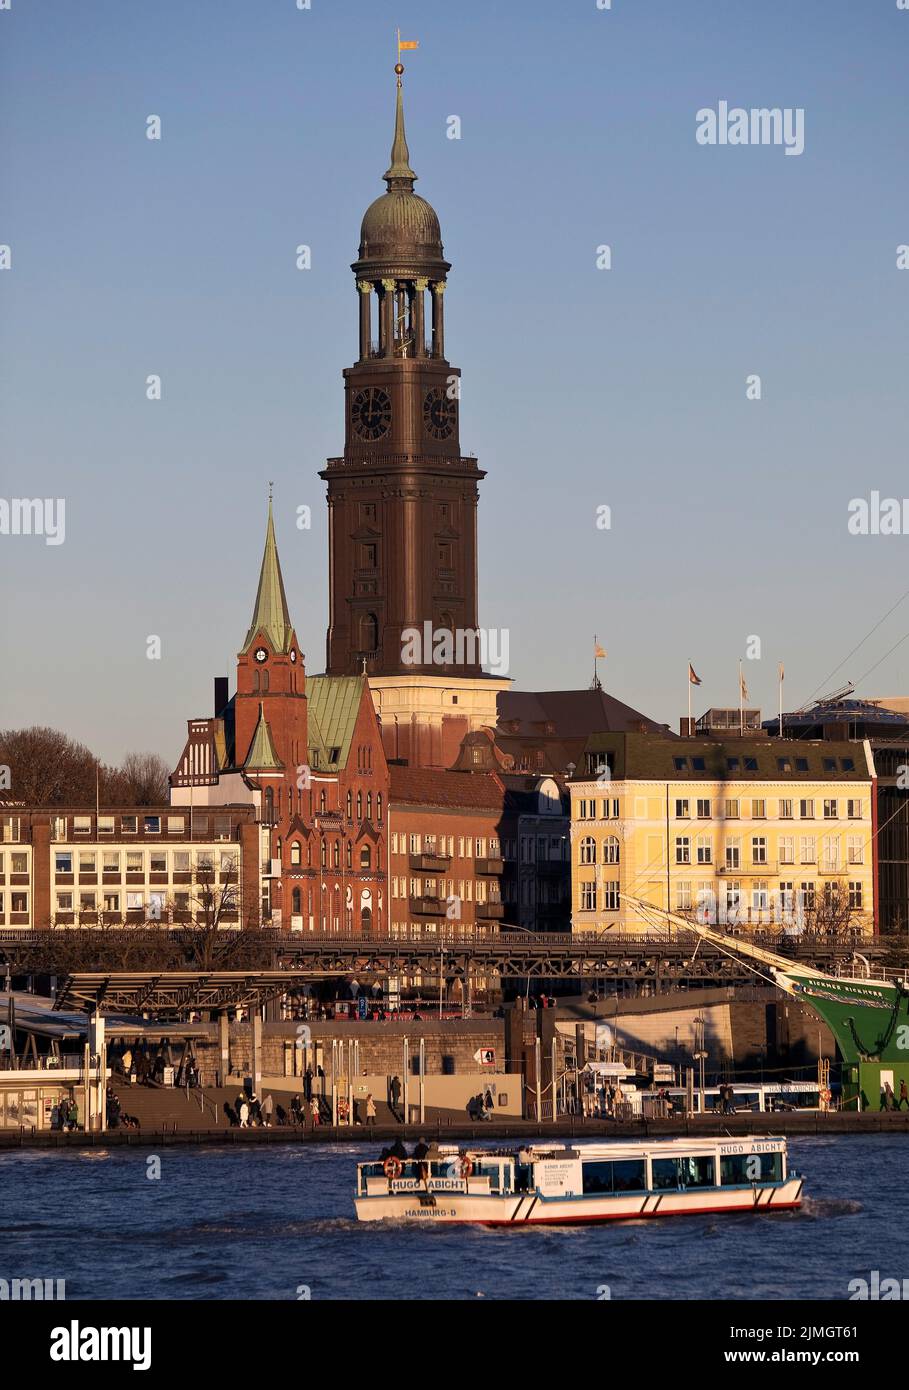 View over the North Elbe to the steeple of the main church St. Michaelis, Hamburg, Germany, Europe Stock Photo